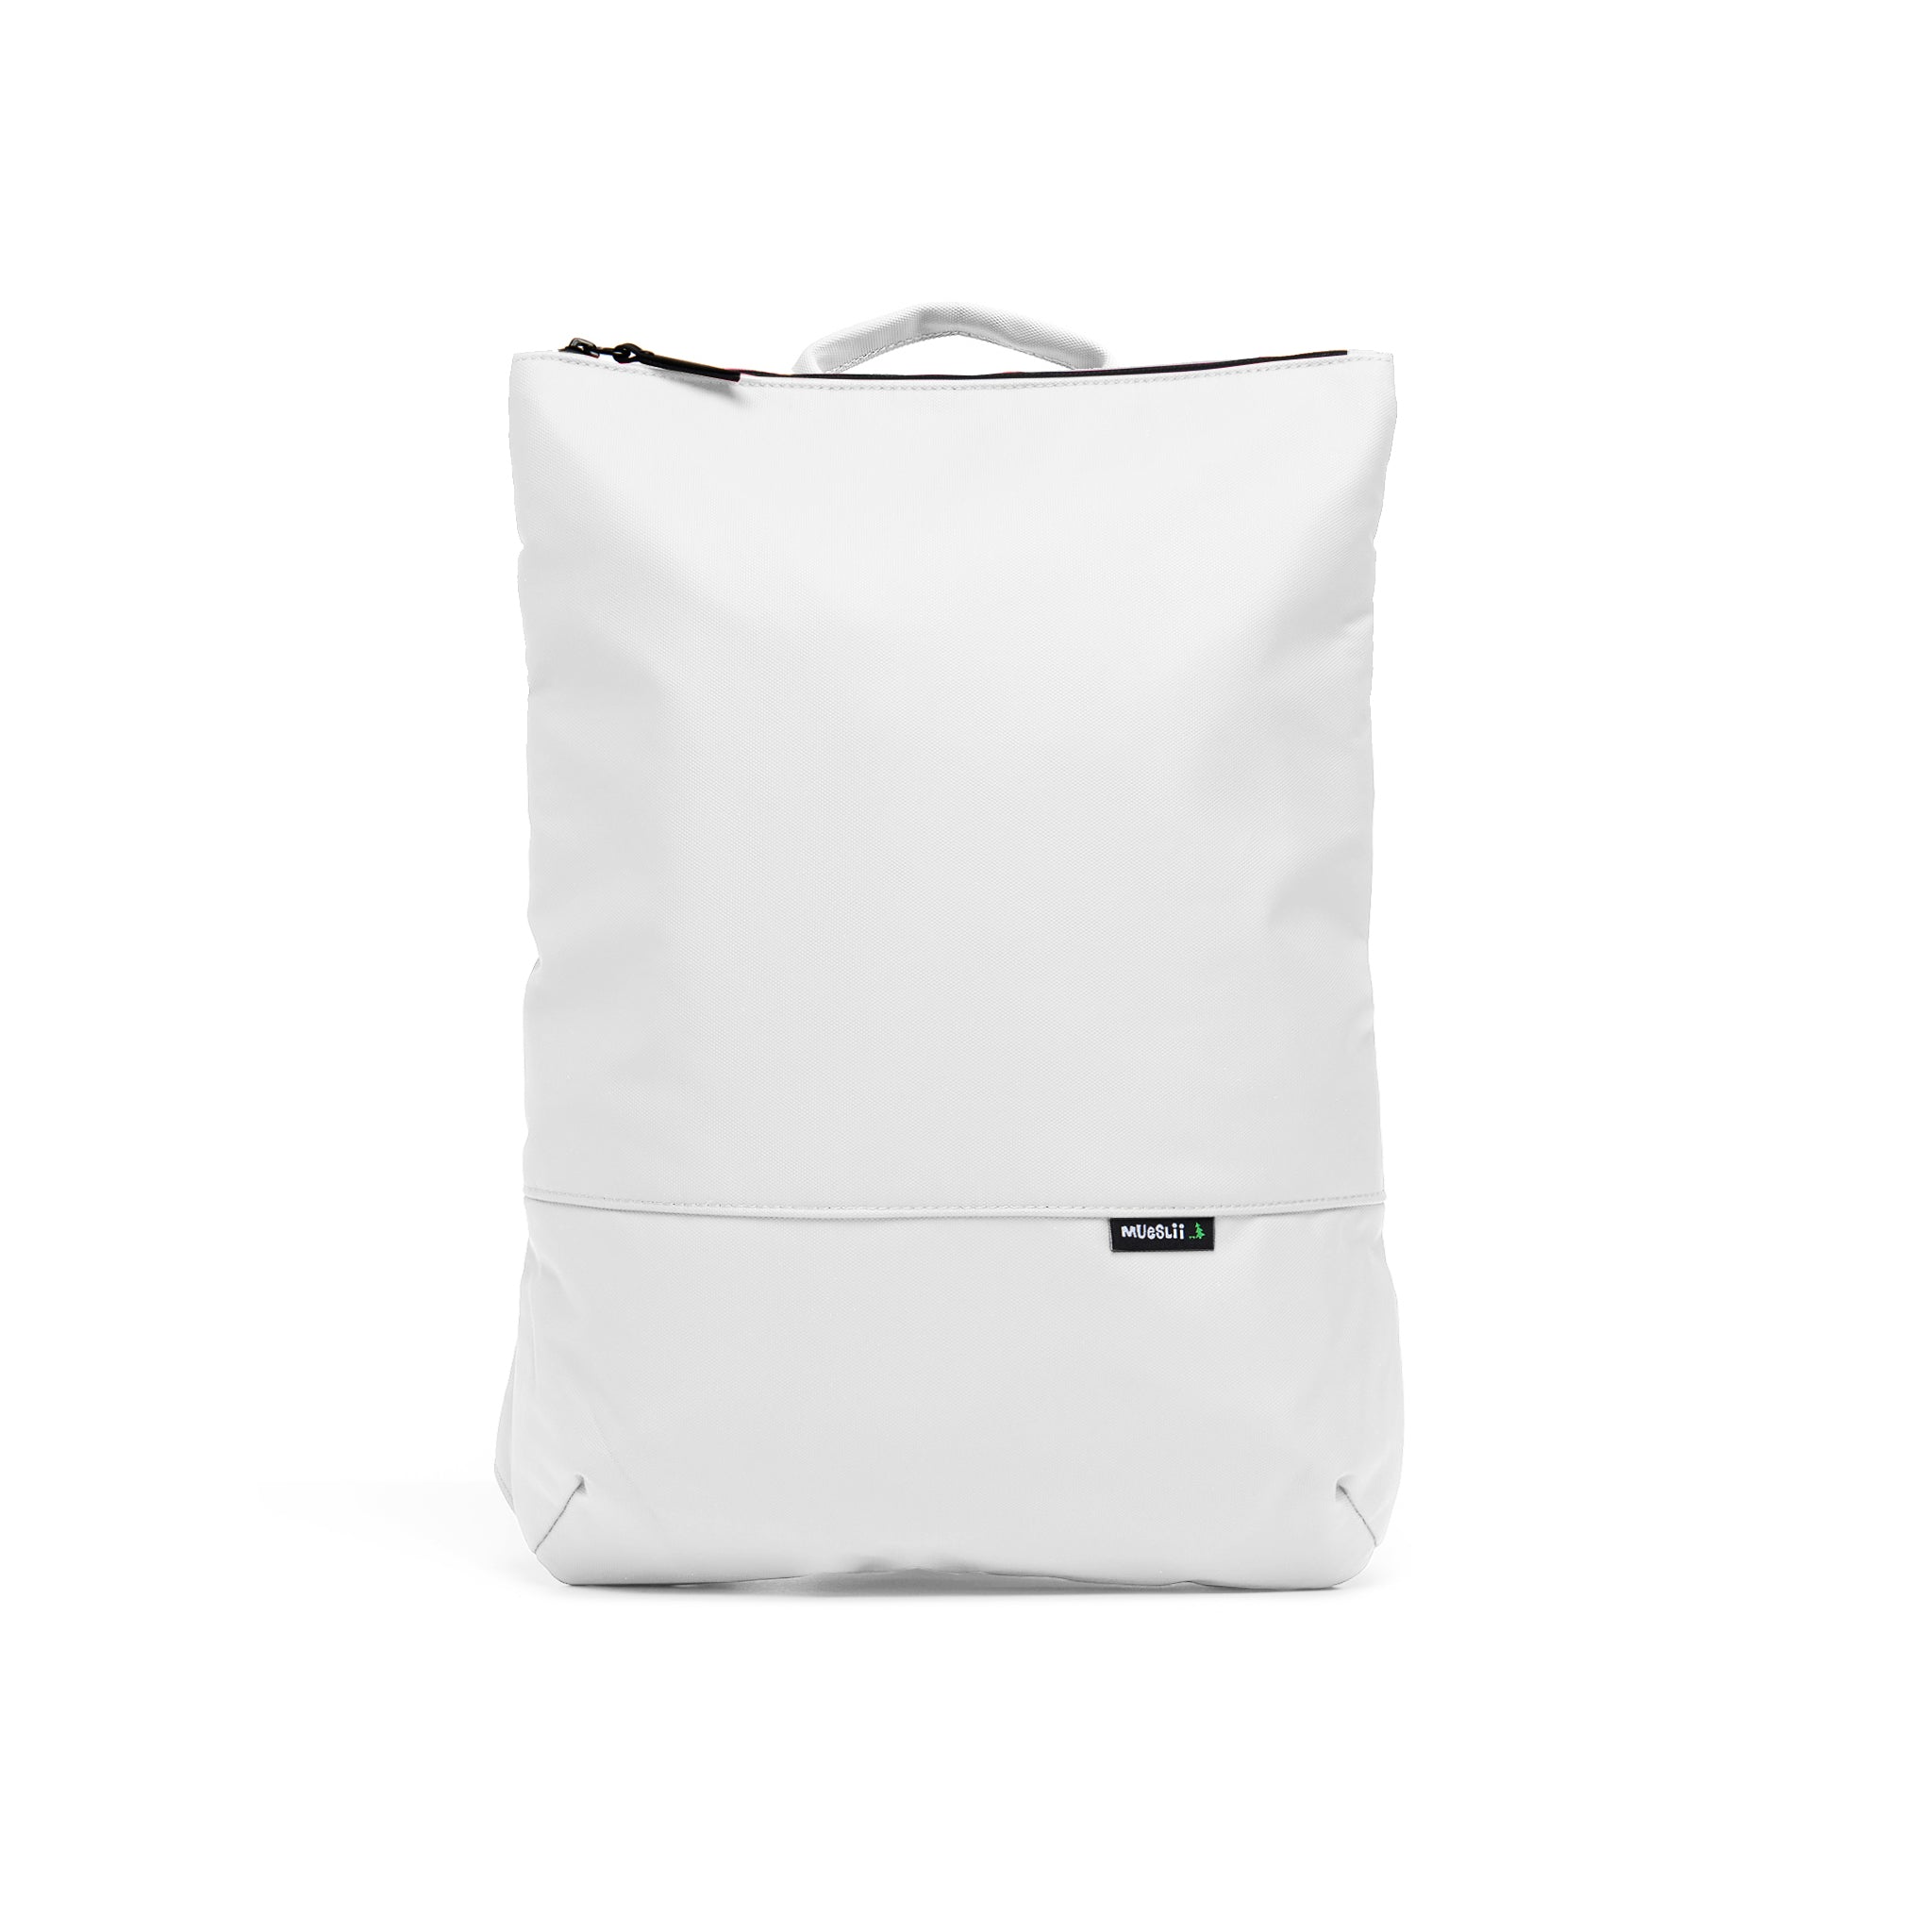 Mueslii light pack,  made of PU coated waterproof nylon, color white, front view.